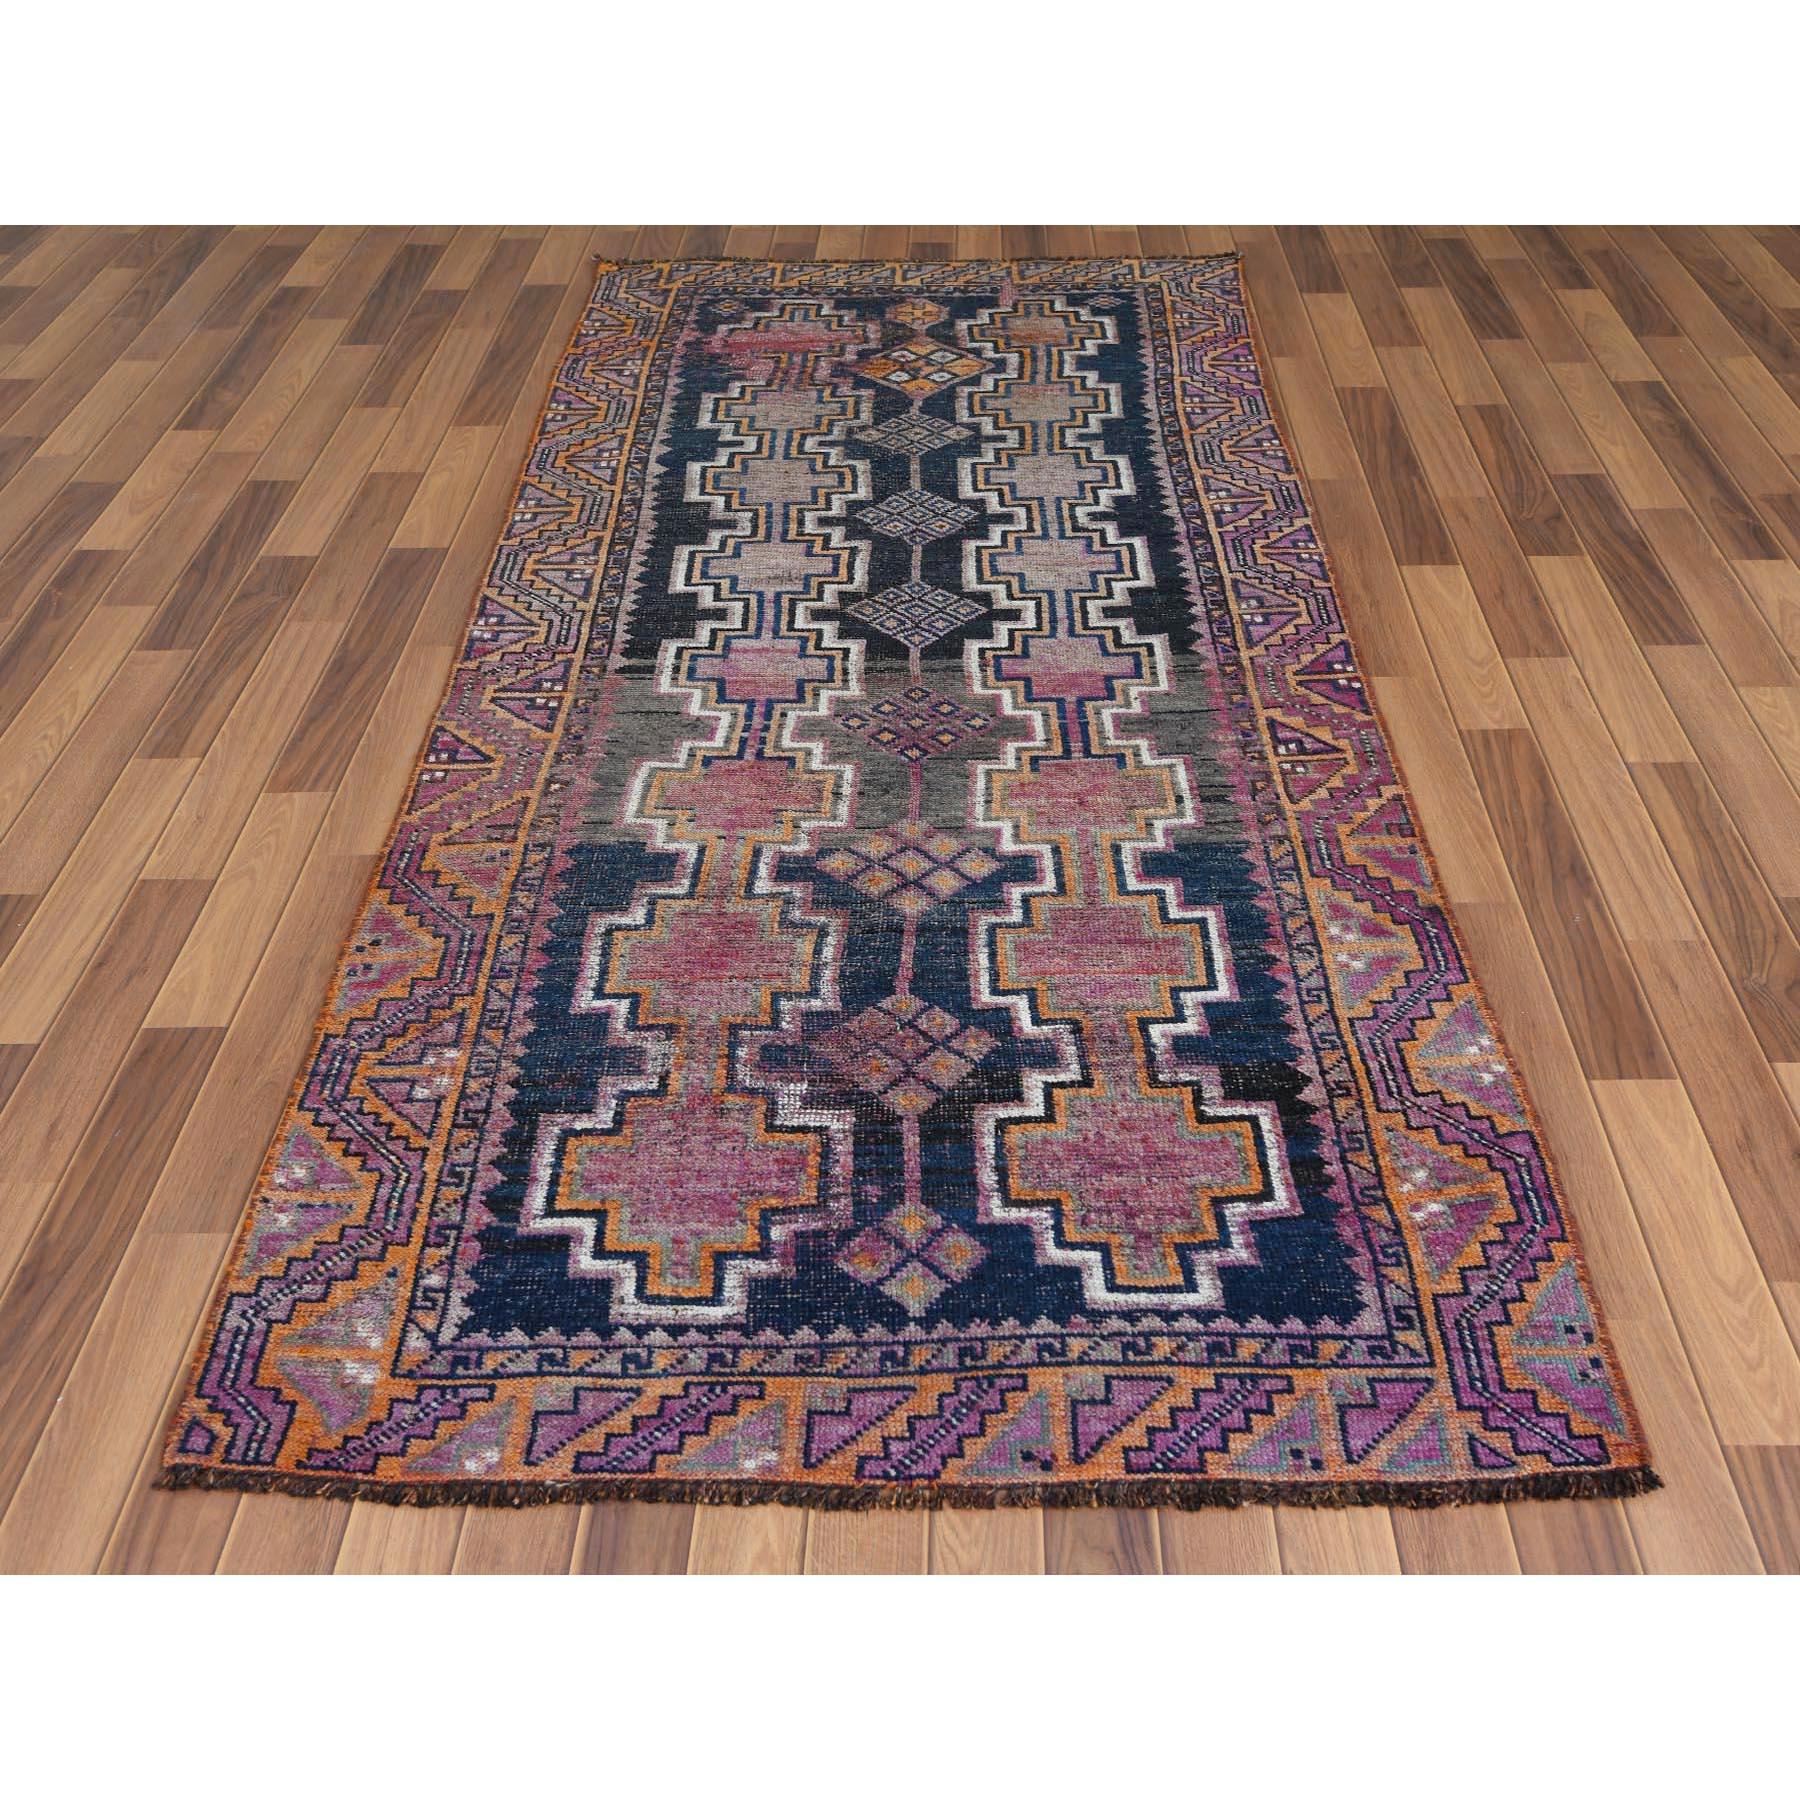 This fabulous hand knotted carpet has been created and designed for extra strength and durability. This rug has been handcrafted for weeks in the traditional method that is used to make rugs. This is truly a one of a kind piece. 

Exact rug size in